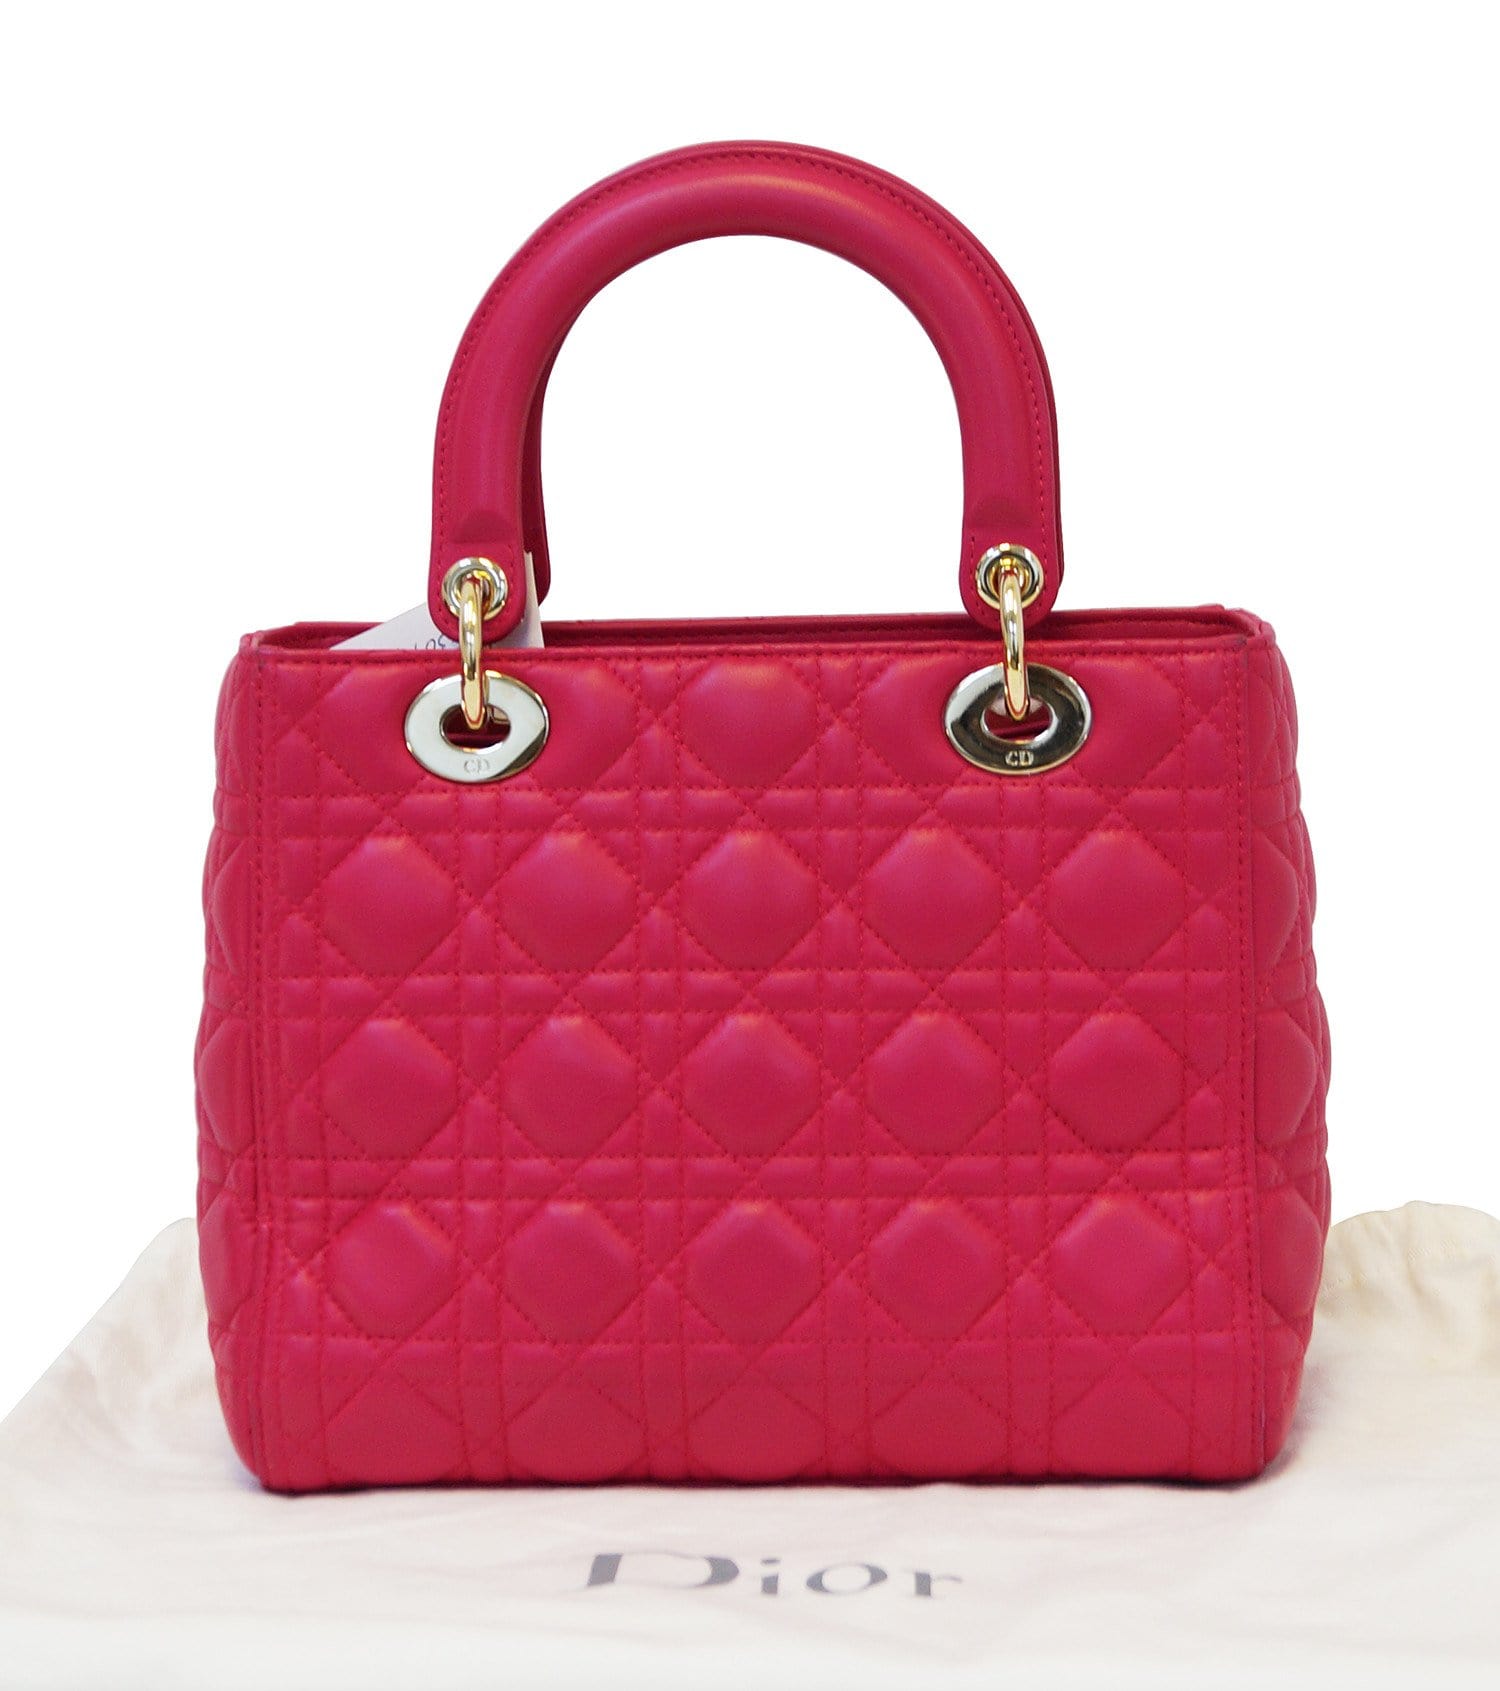 Dior Lady Tote Pink Bags & Handbags for Women for sale